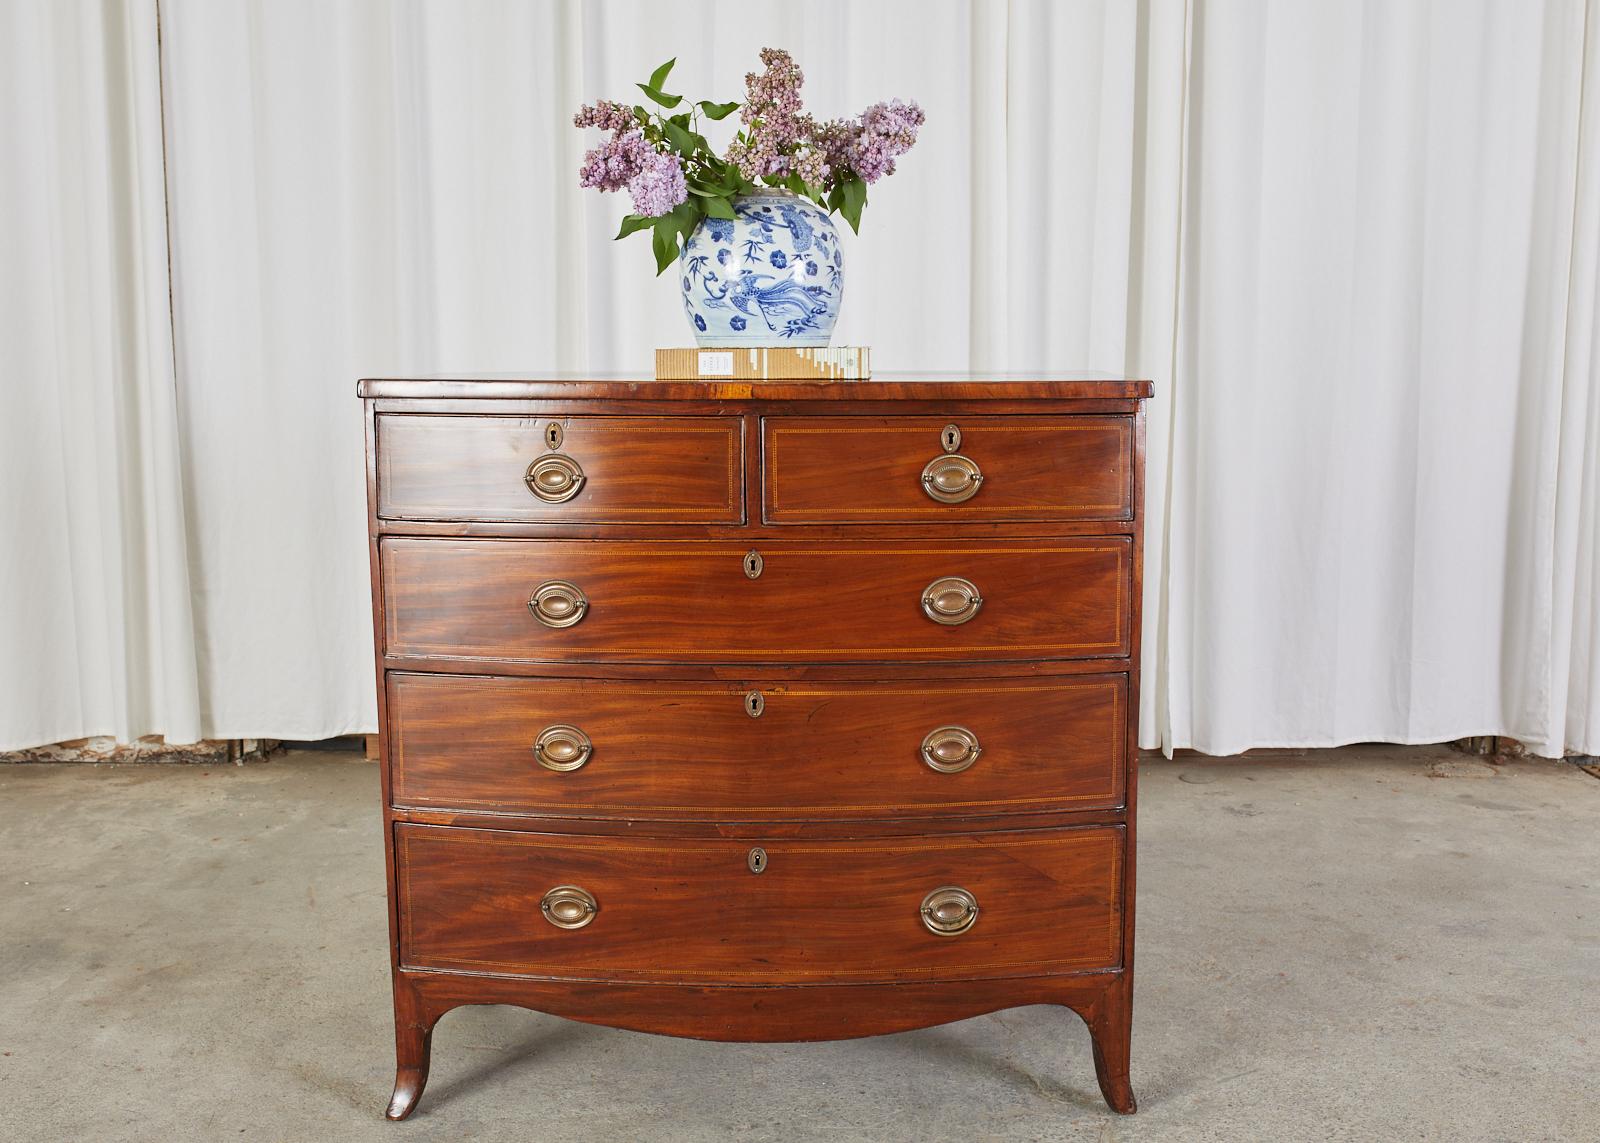 Handsome 19th century mahogany bow front chest of drawers made in the English Georgian taste. The large case features five storage drawers with brass pulls. The drawers and case top are embellished with delicate thread inlay around the borders. The